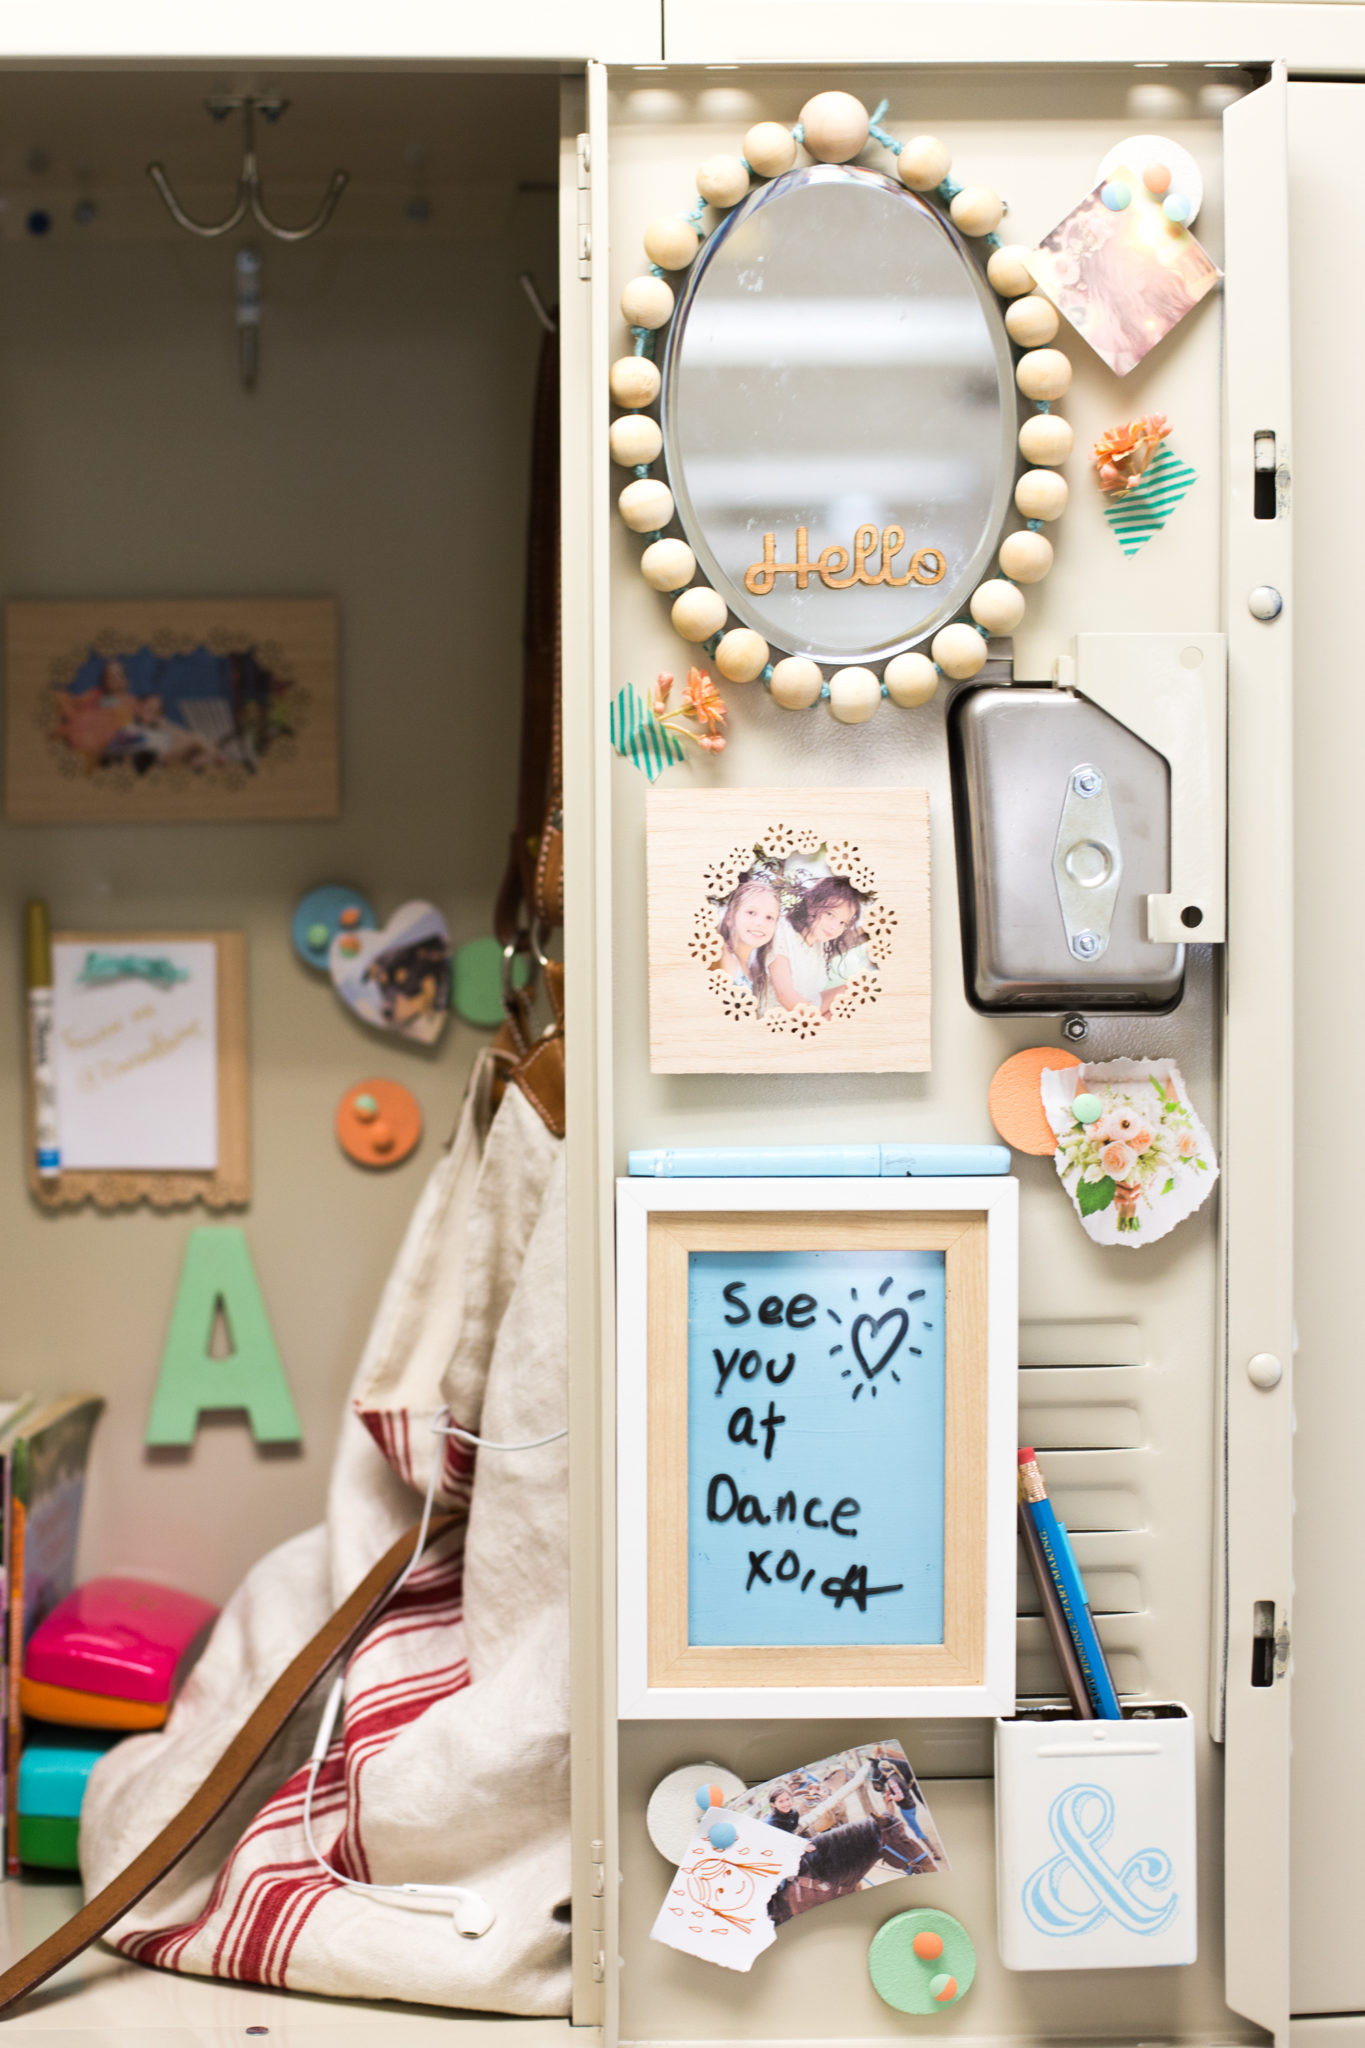 DIY Locker Decorations With Household Items
 DIY Locker Decorations Mirror Bulletin Board Flax & Twine